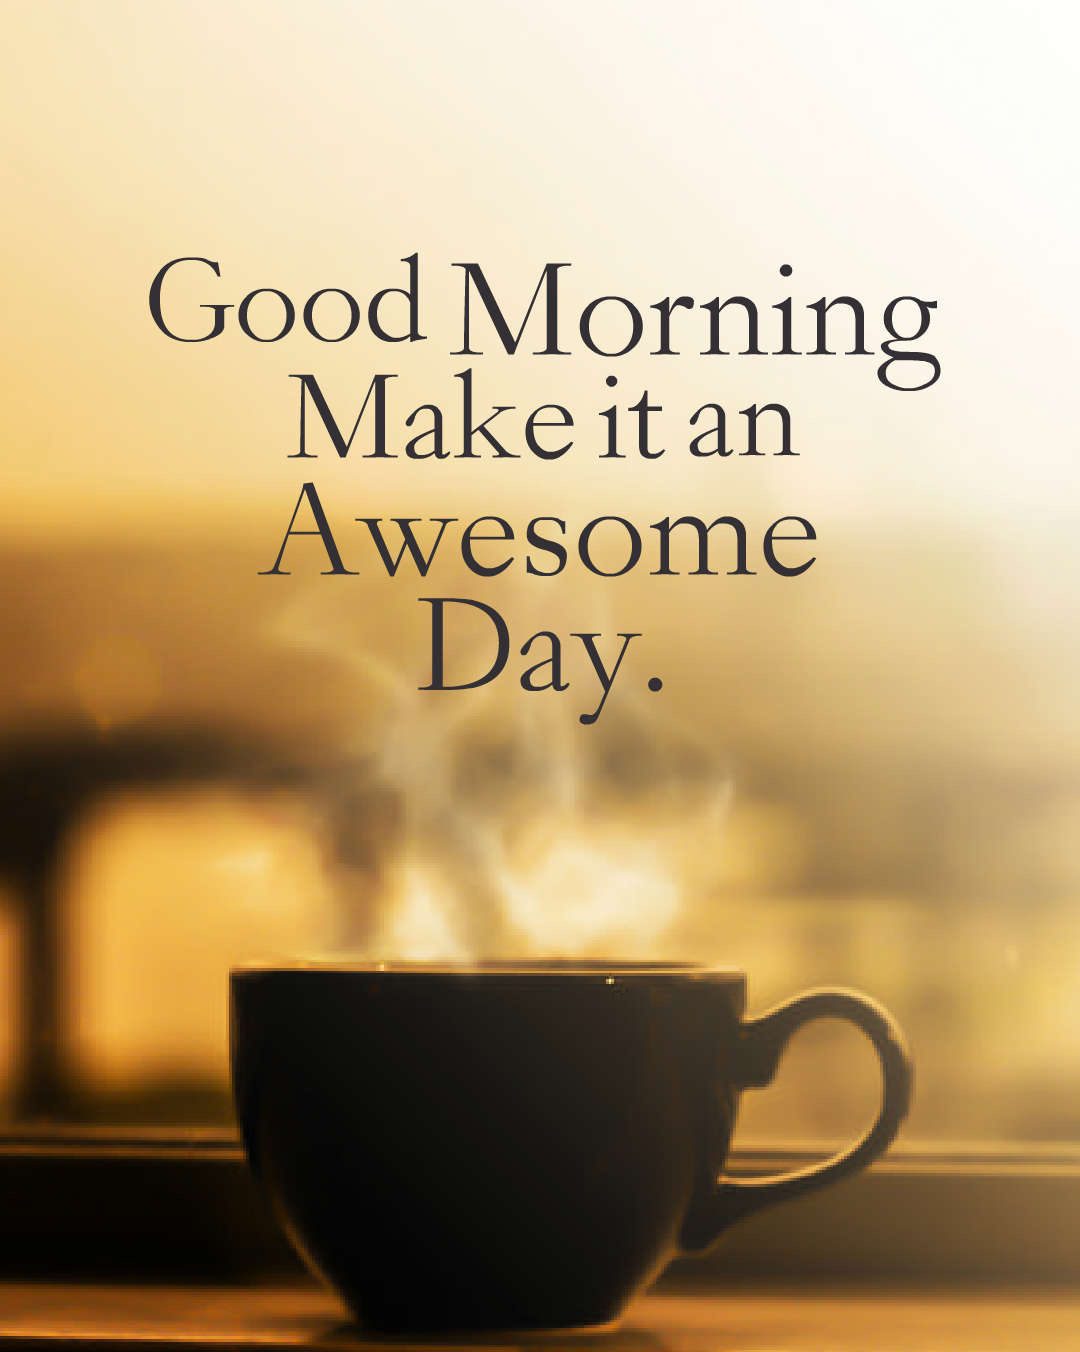 Good Morning Make it an Awesome Day.